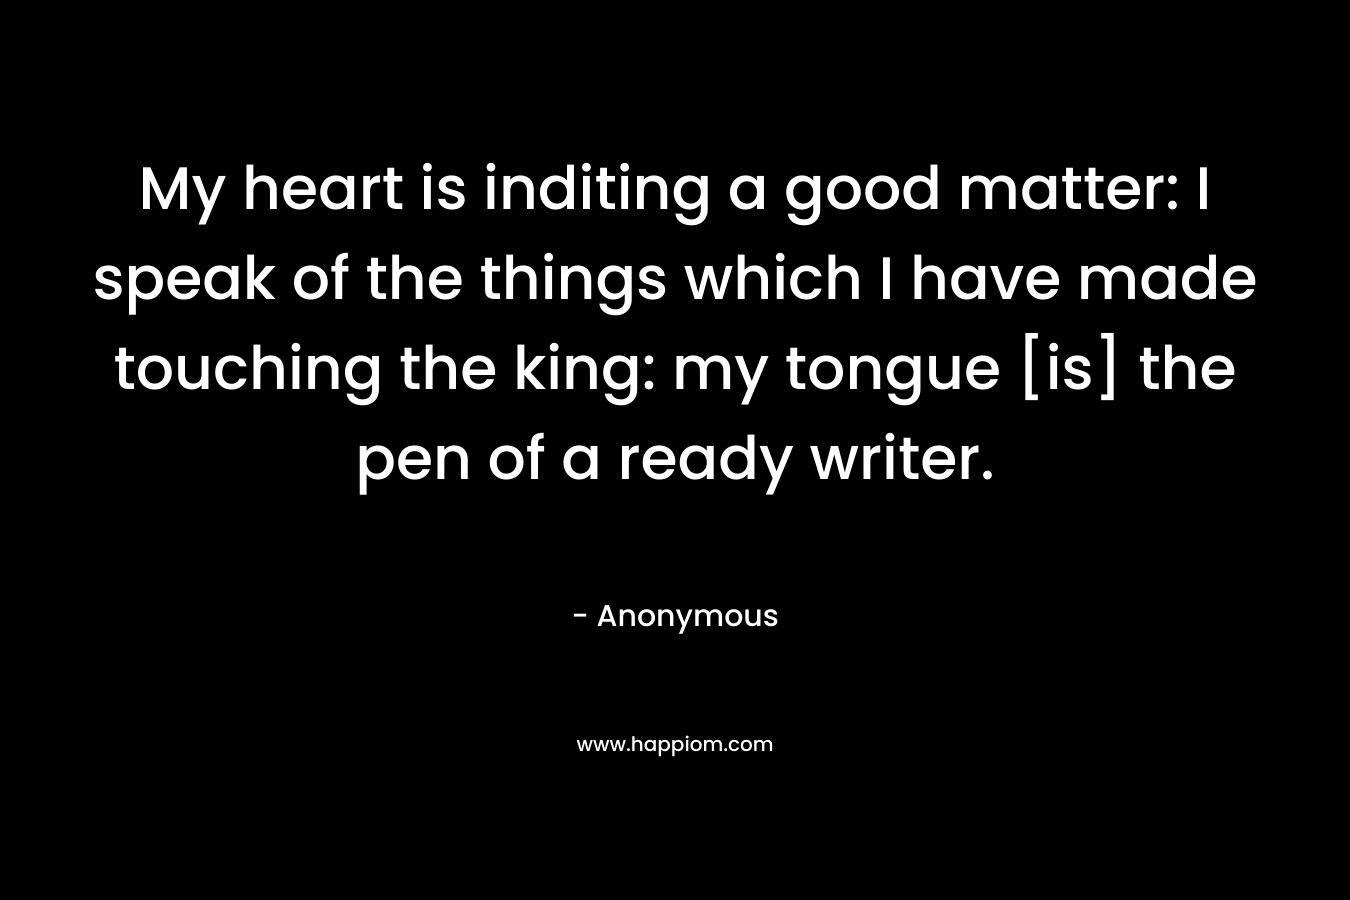 My heart is inditing a good matter: I speak of the things which I have made touching the king: my tongue [is] the pen of a ready writer.